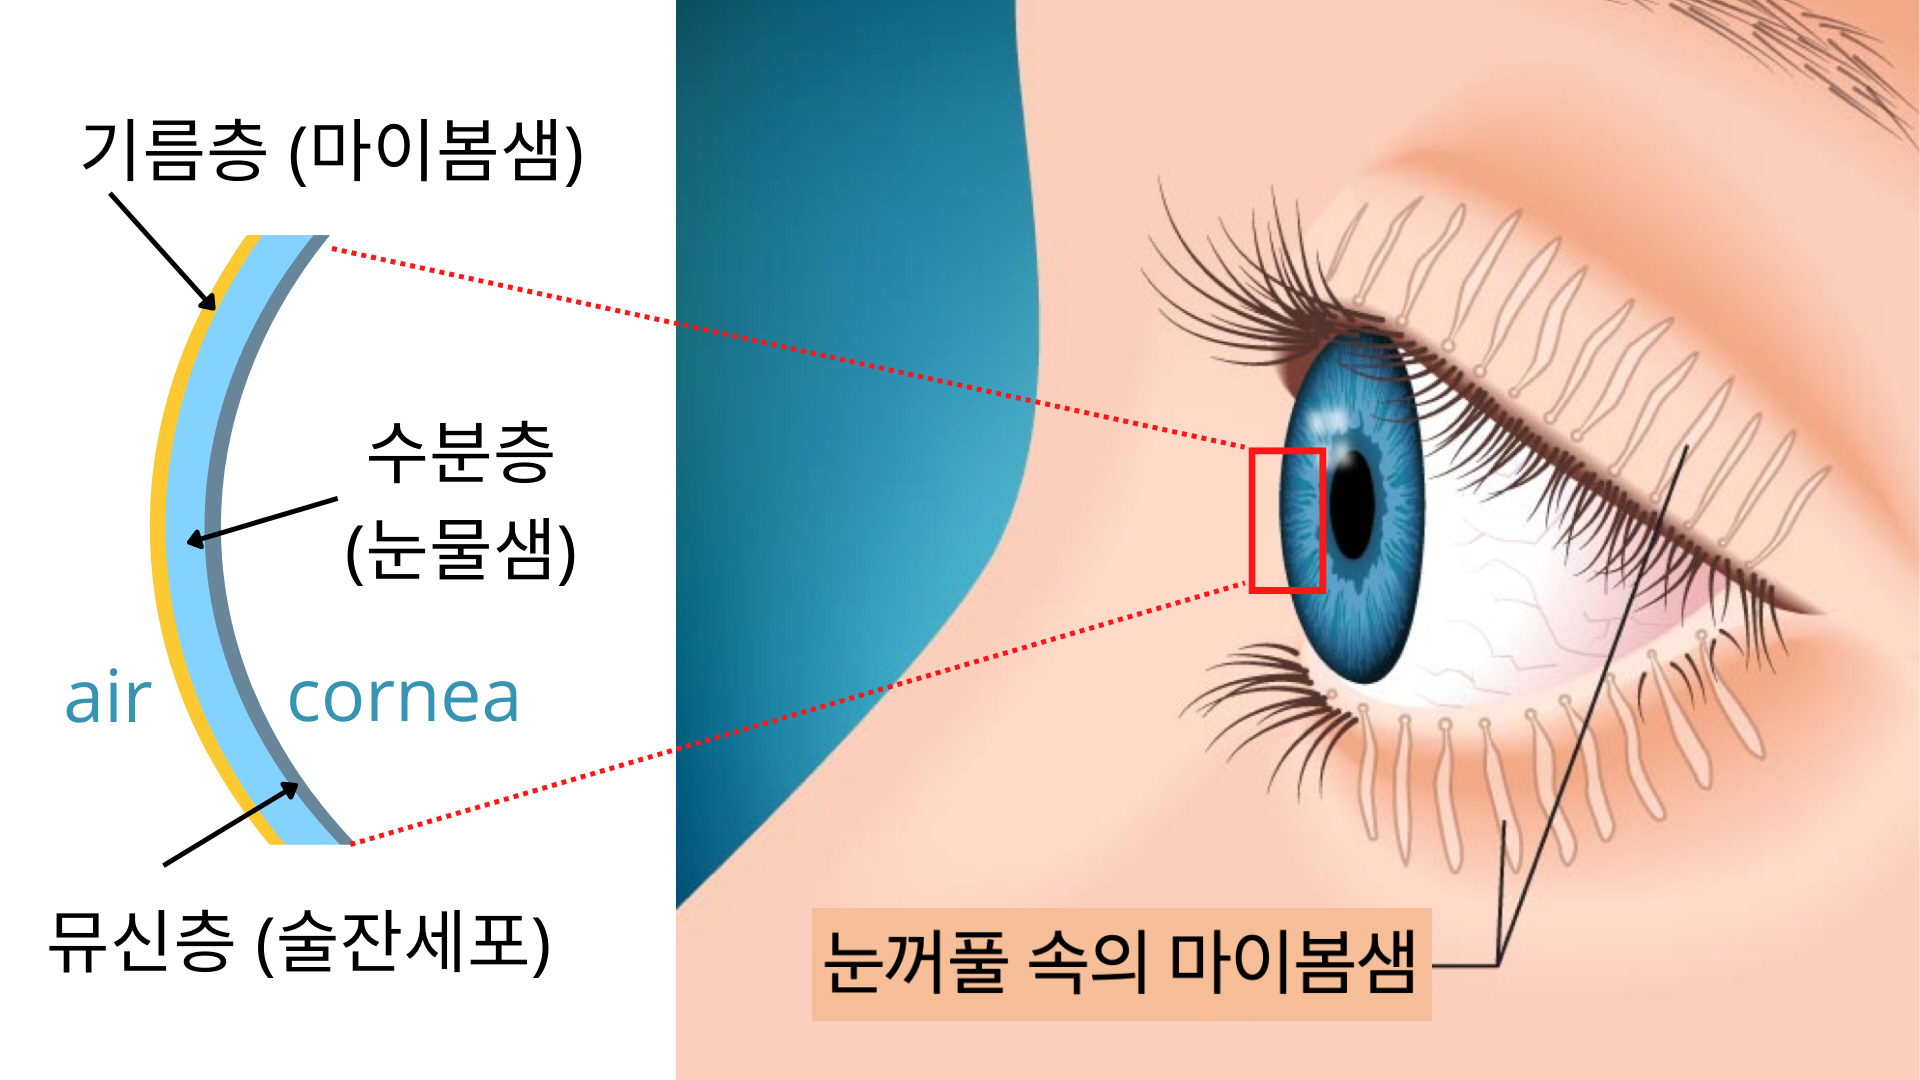 Professor Euiheon Chung's joint research team quantifies the loss of eyelid mybomsaem with artificial intelligence! 이미지